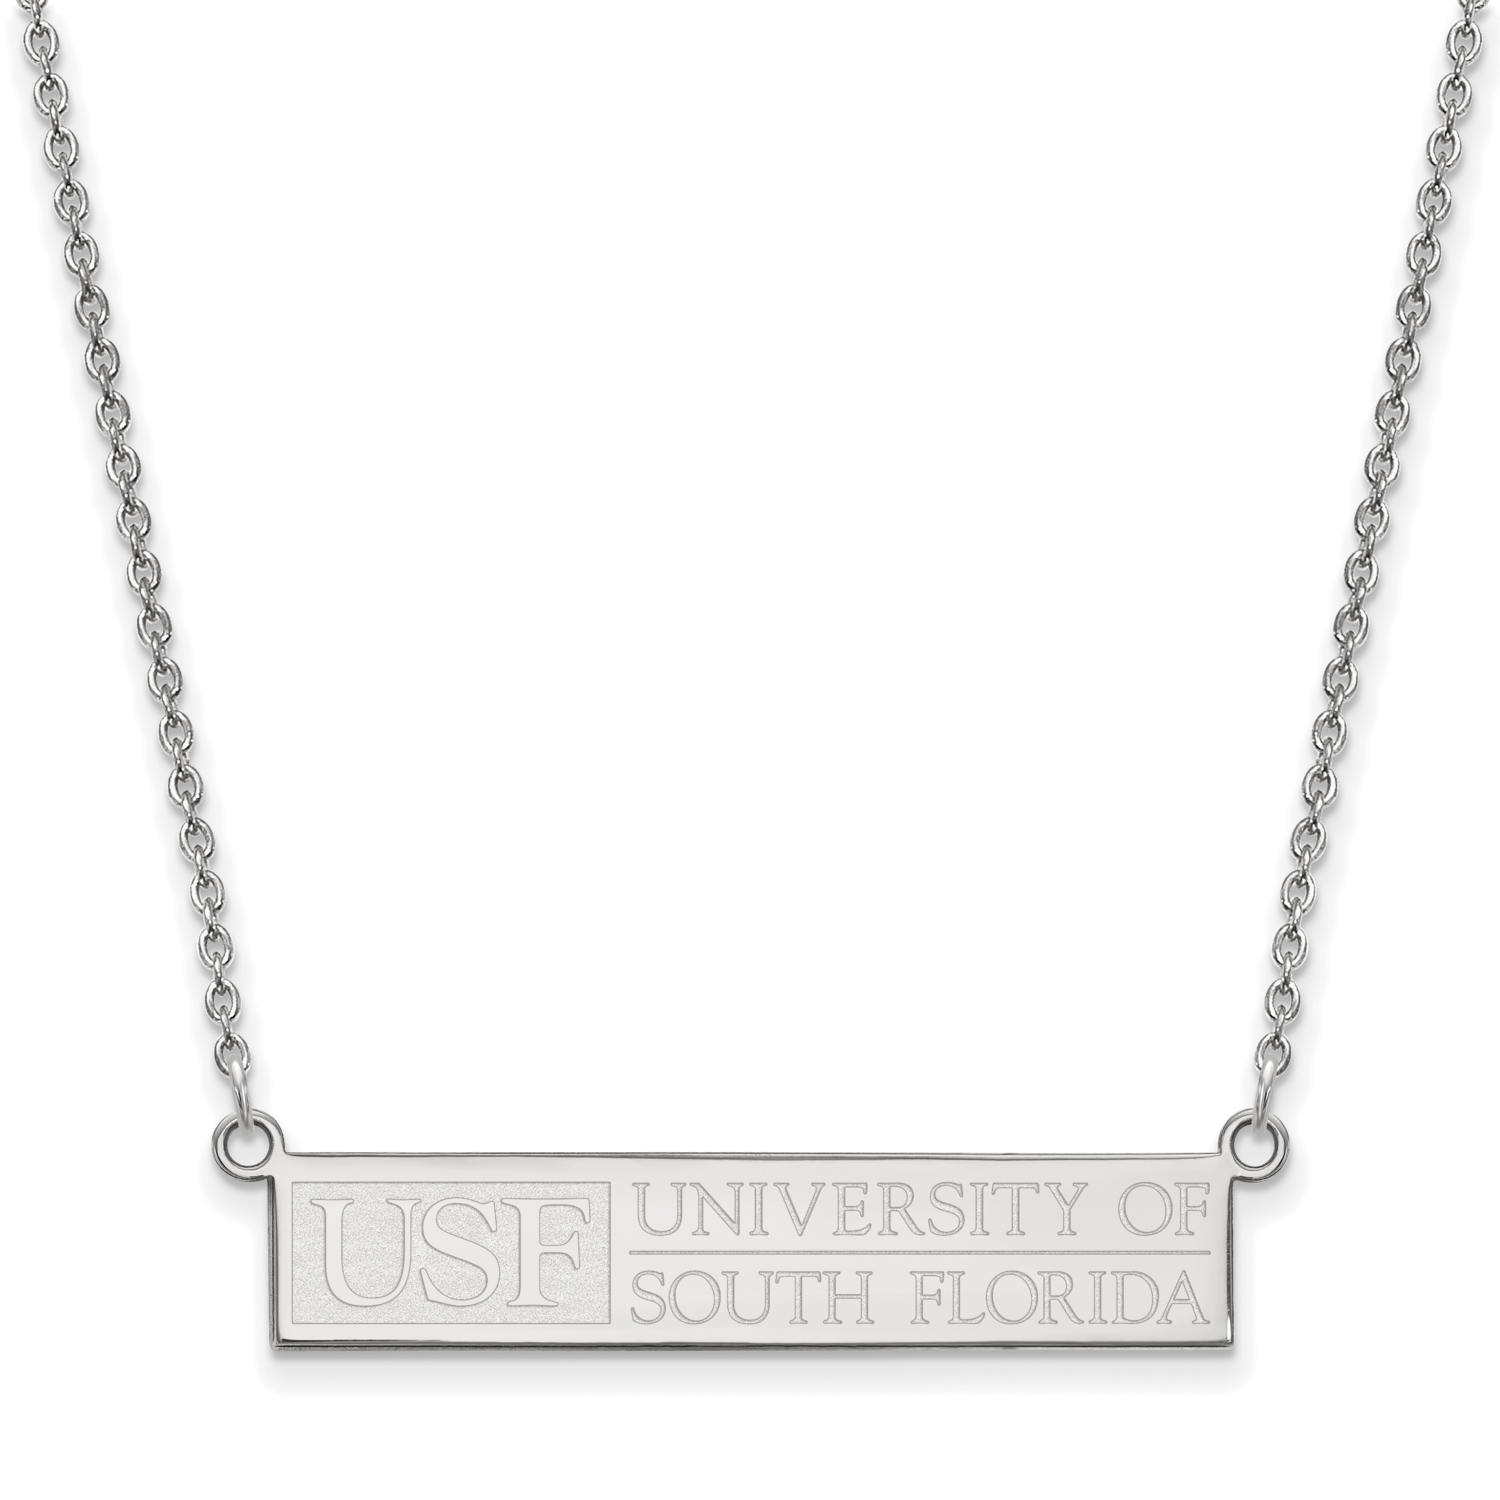 LA University of South Florida Small Pendant Necklace Sterling Silver Rhodium-plated SS031USFL-18